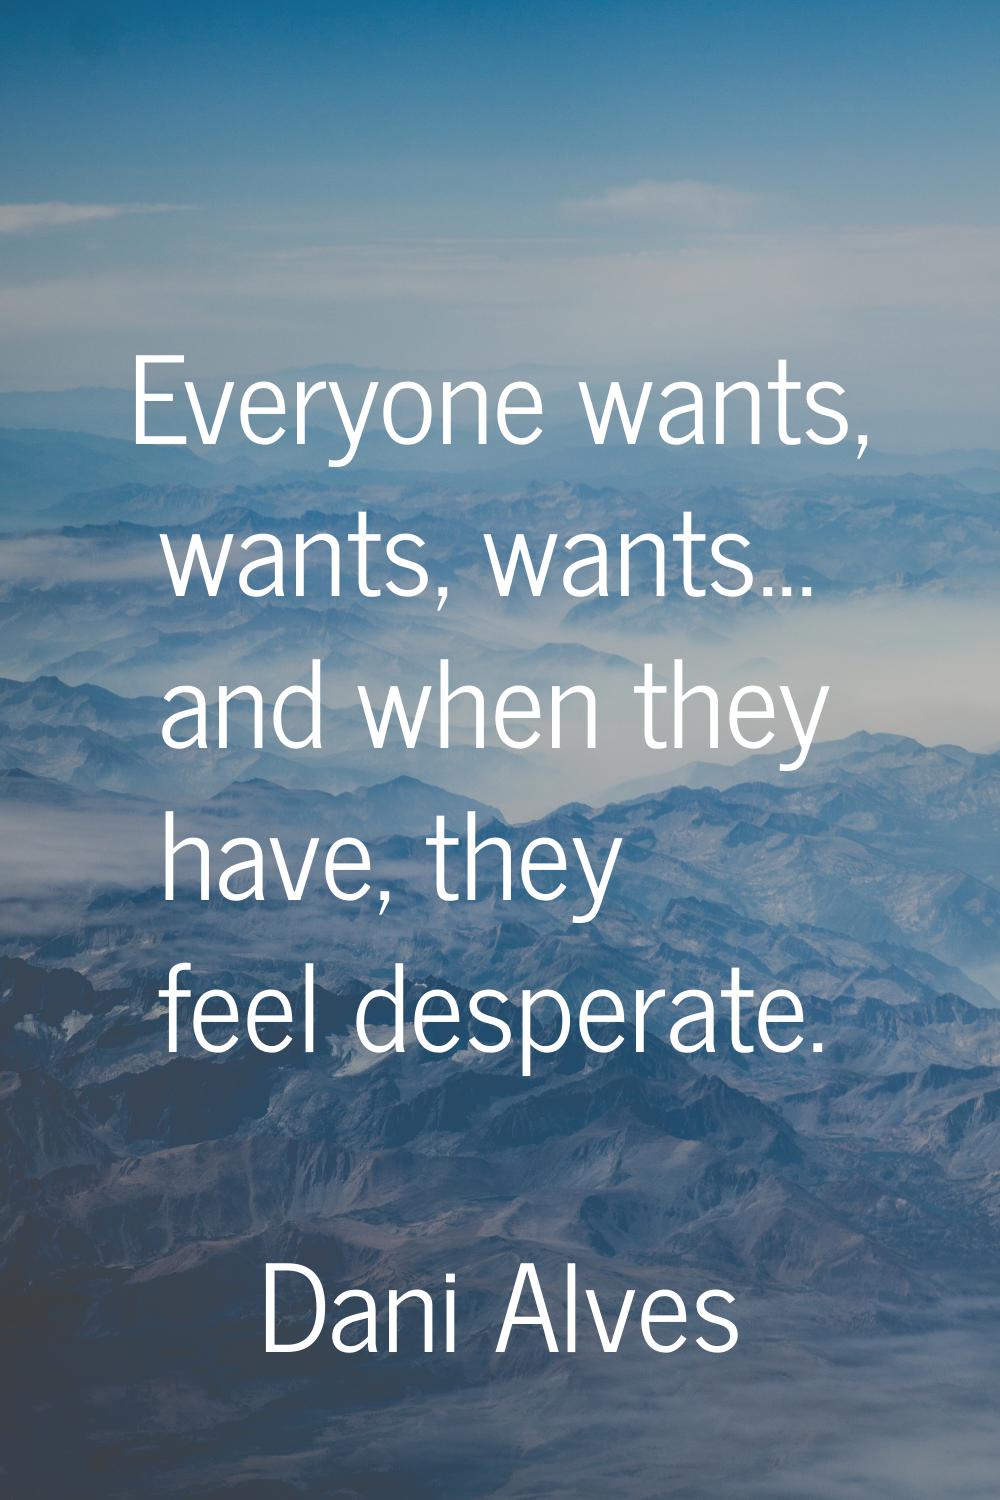 Everyone wants, wants, wants... and when they have, they feel desperate.